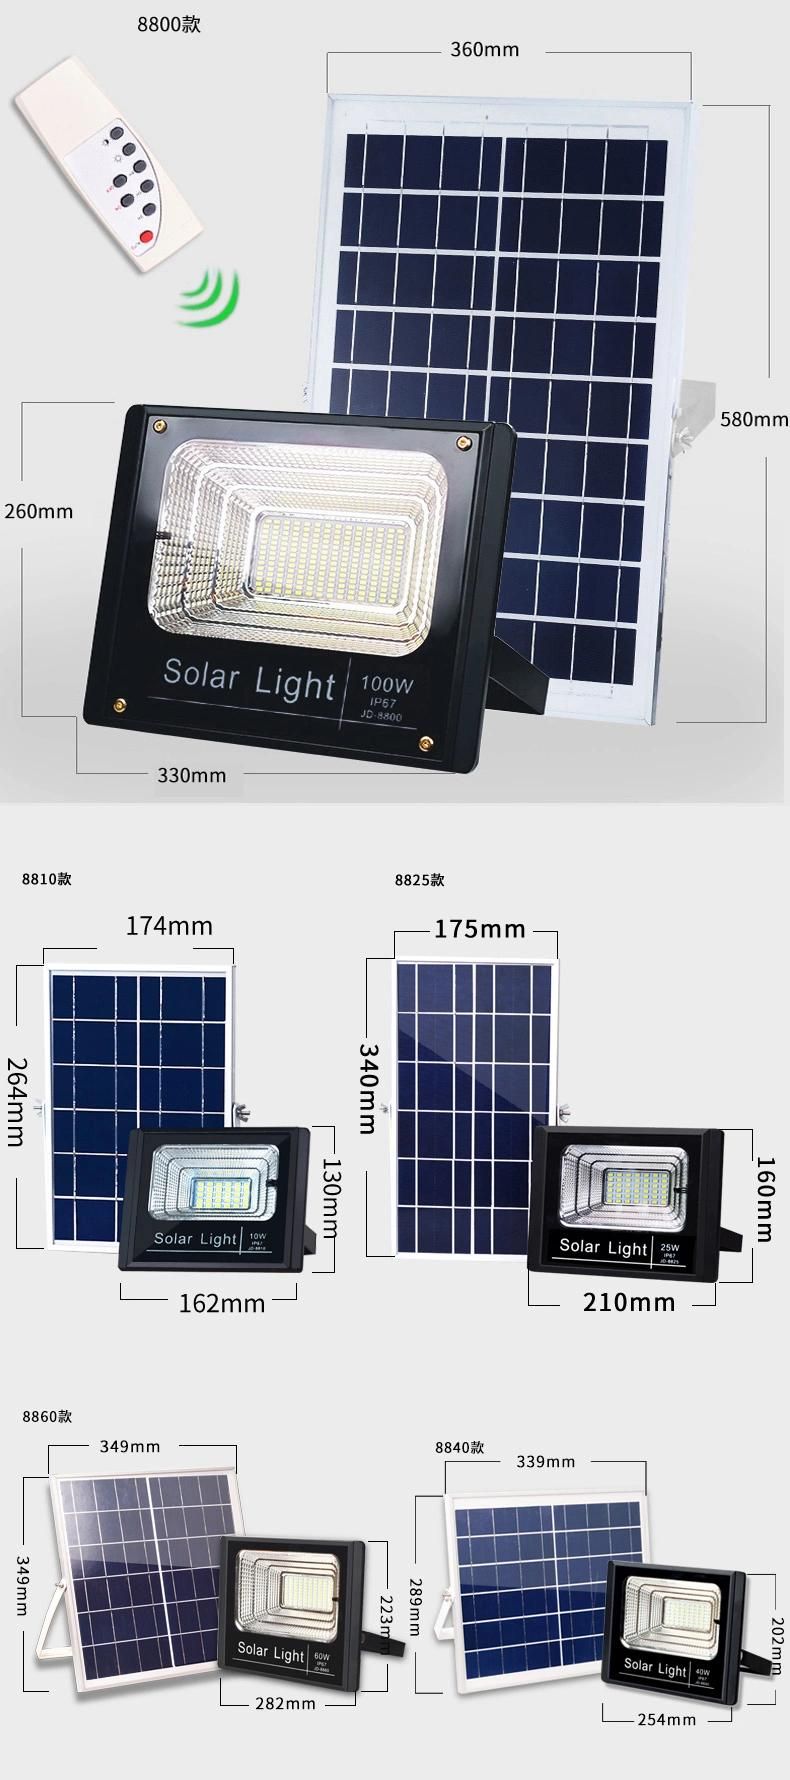 Floodlight Outdoor Camping Lamp IP67 Portable Solarpower Cool White